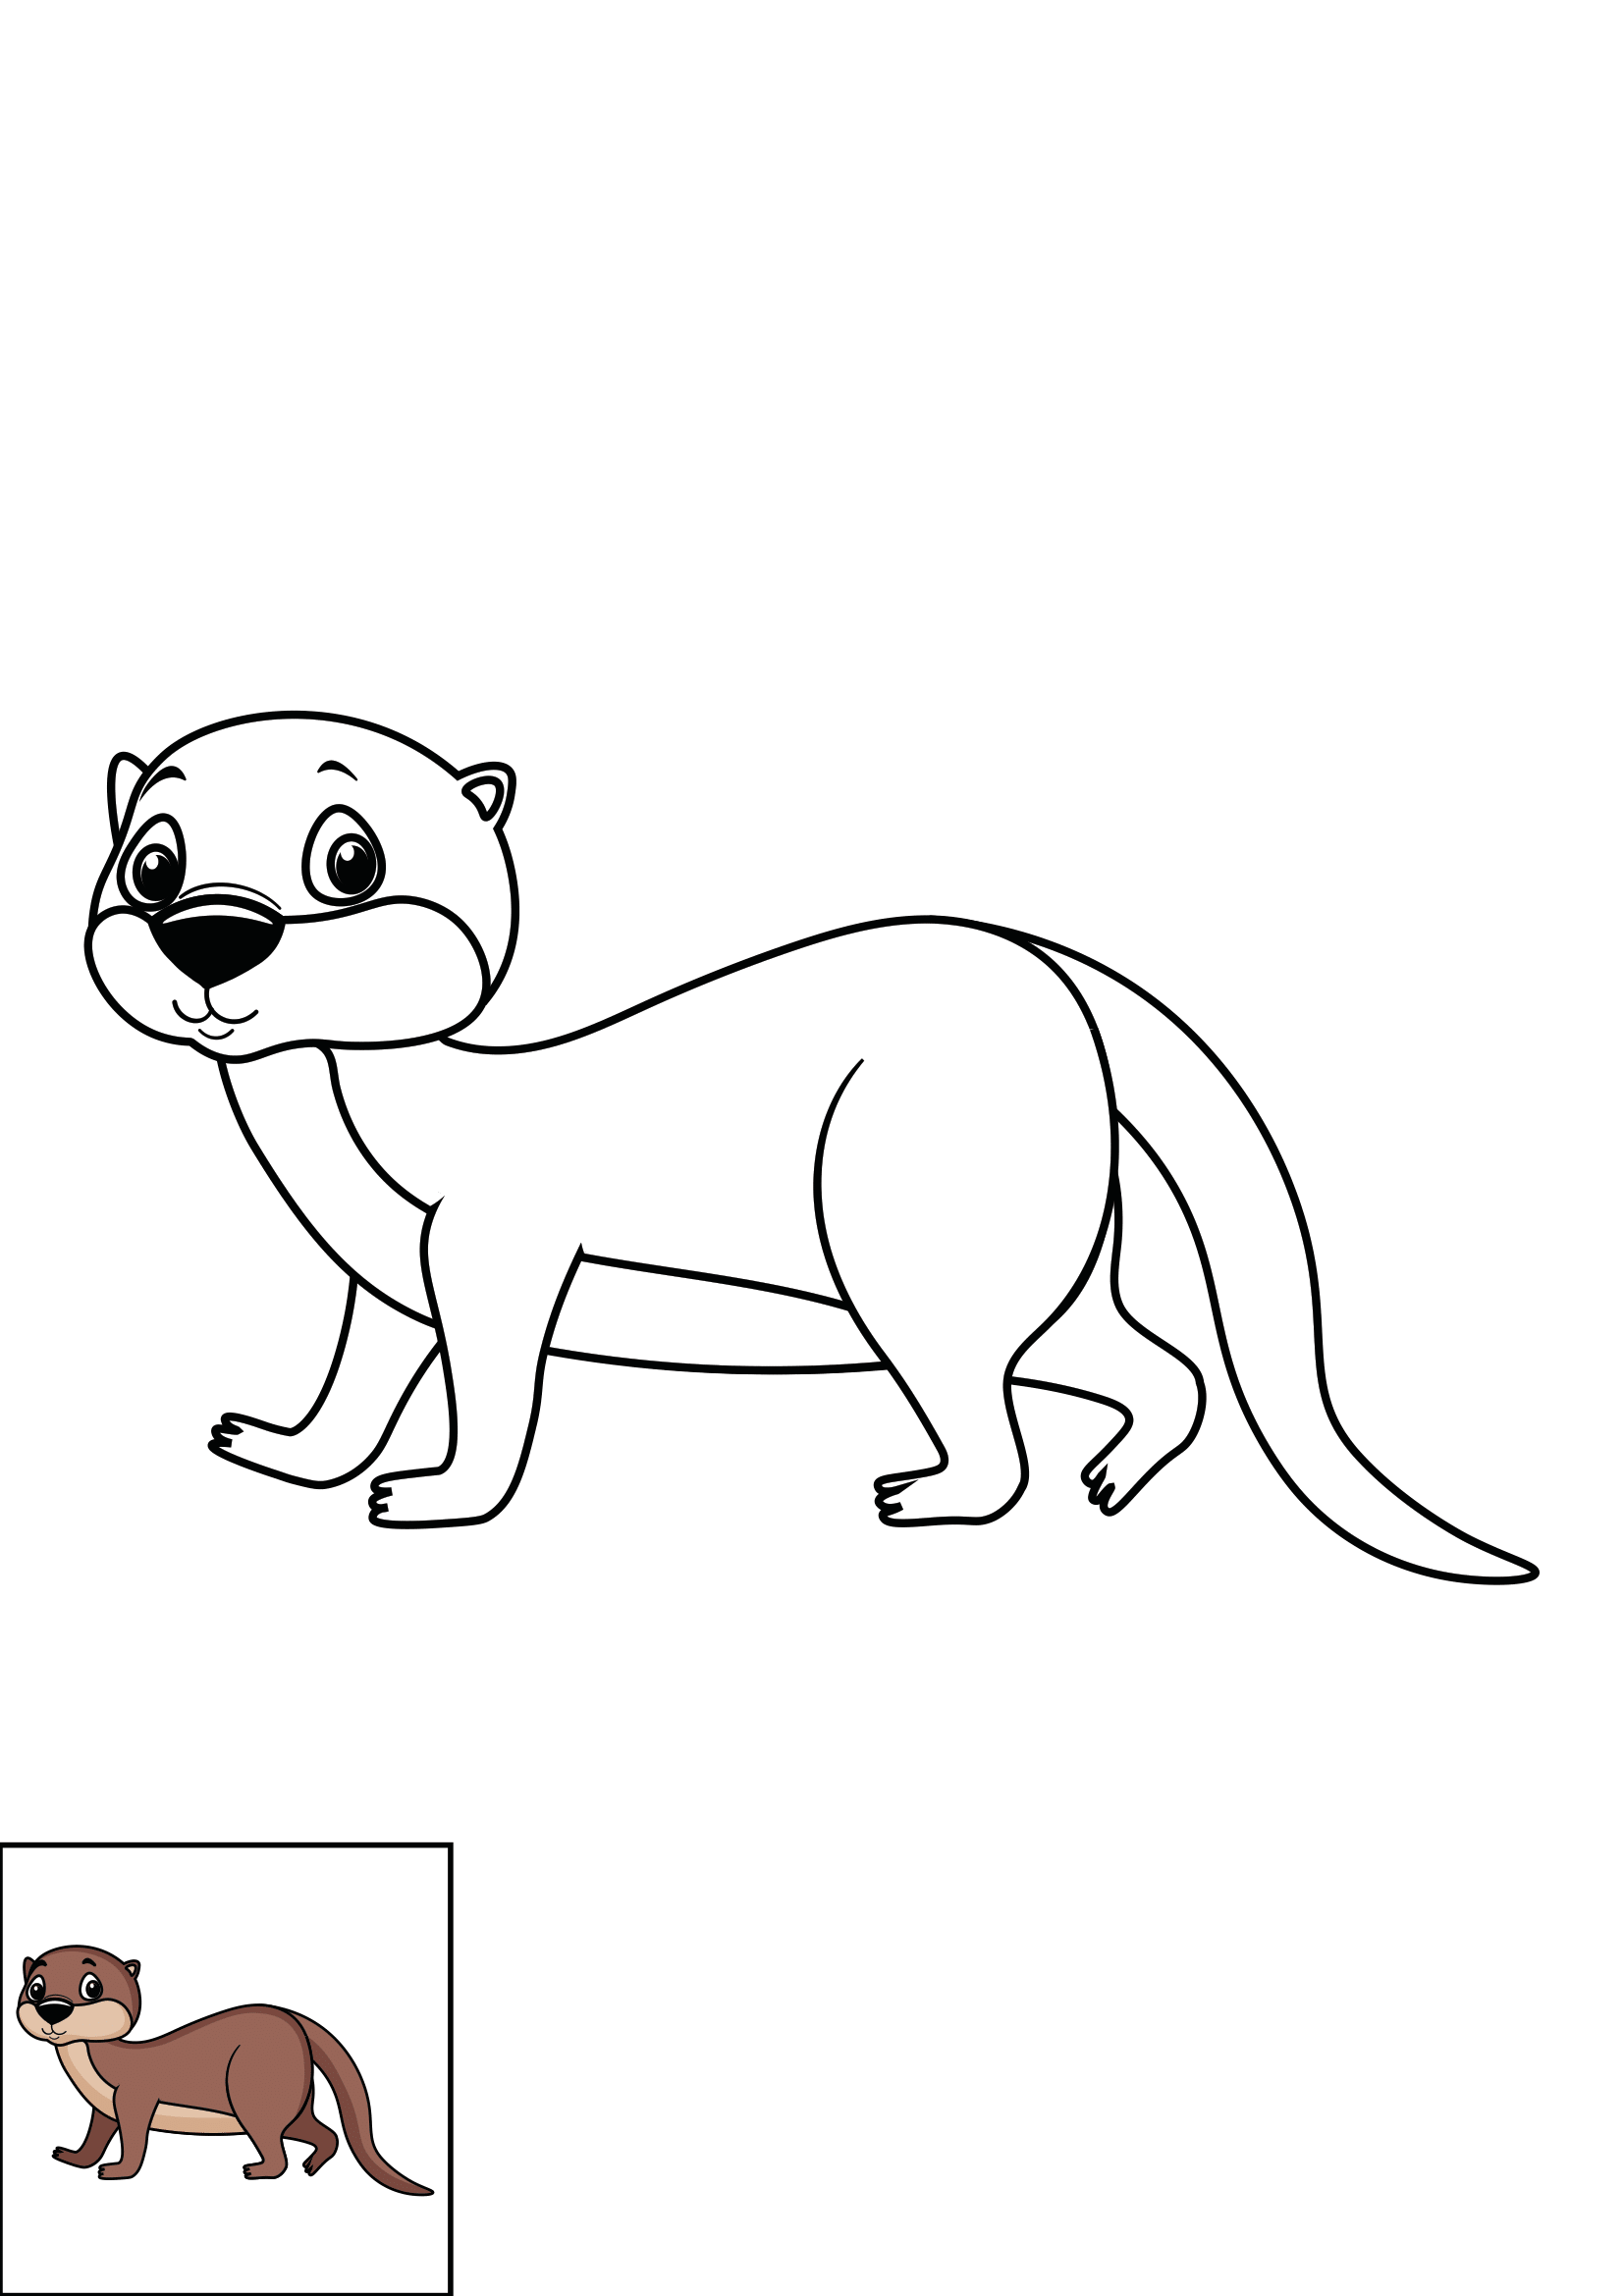 How to Draw An Otter Step by Step Printable Color